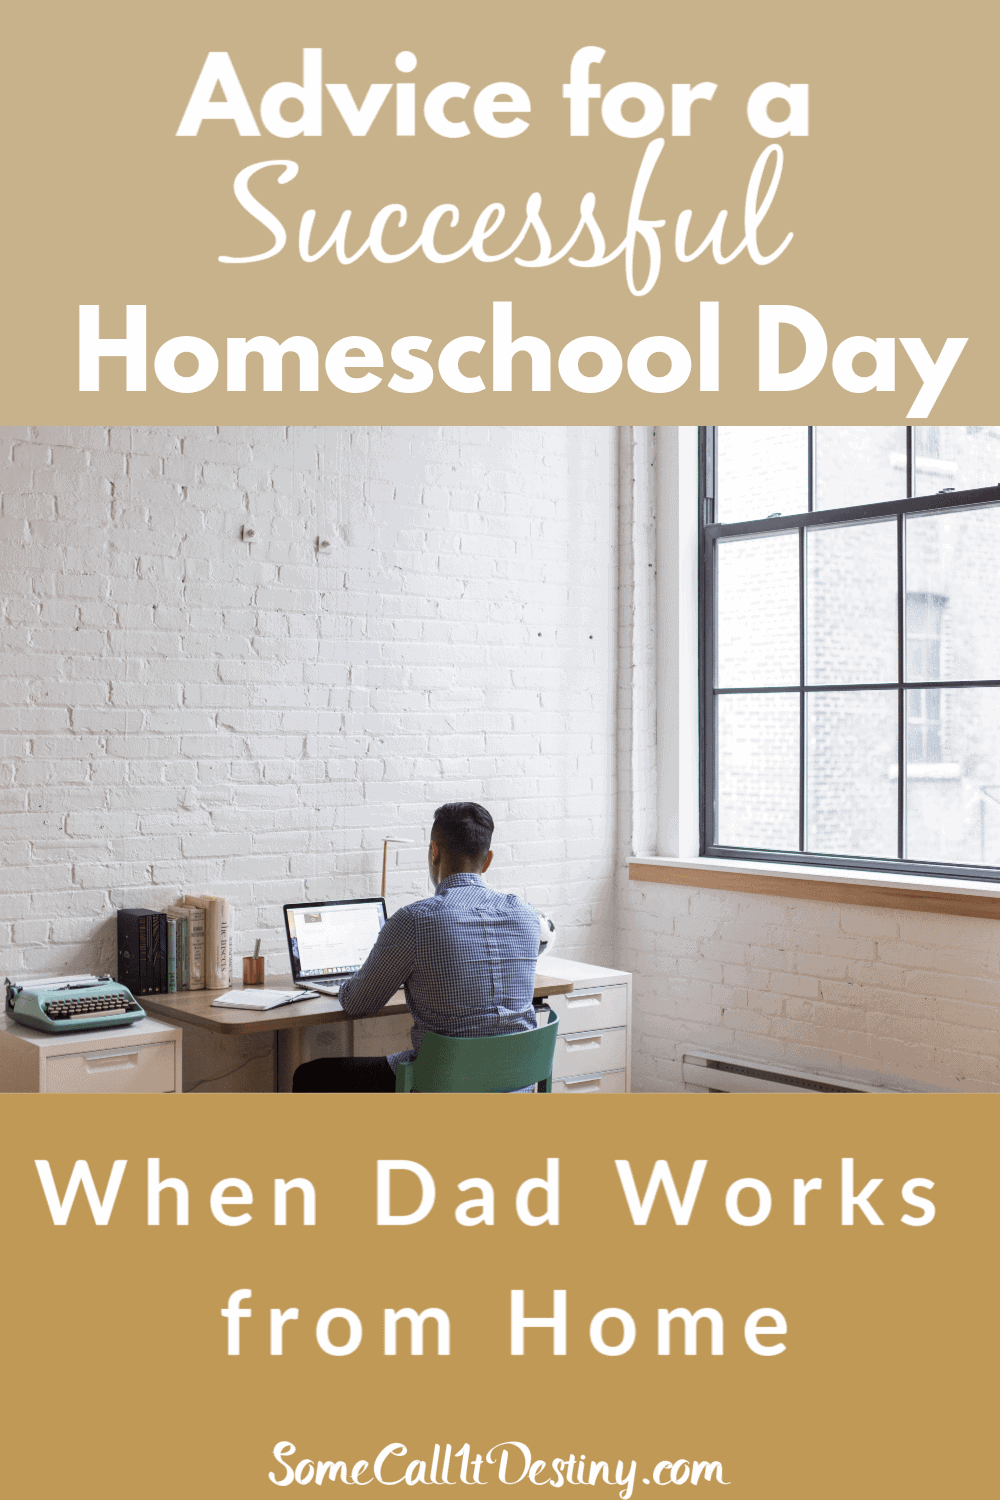 advice for homeschool day when dad works from home